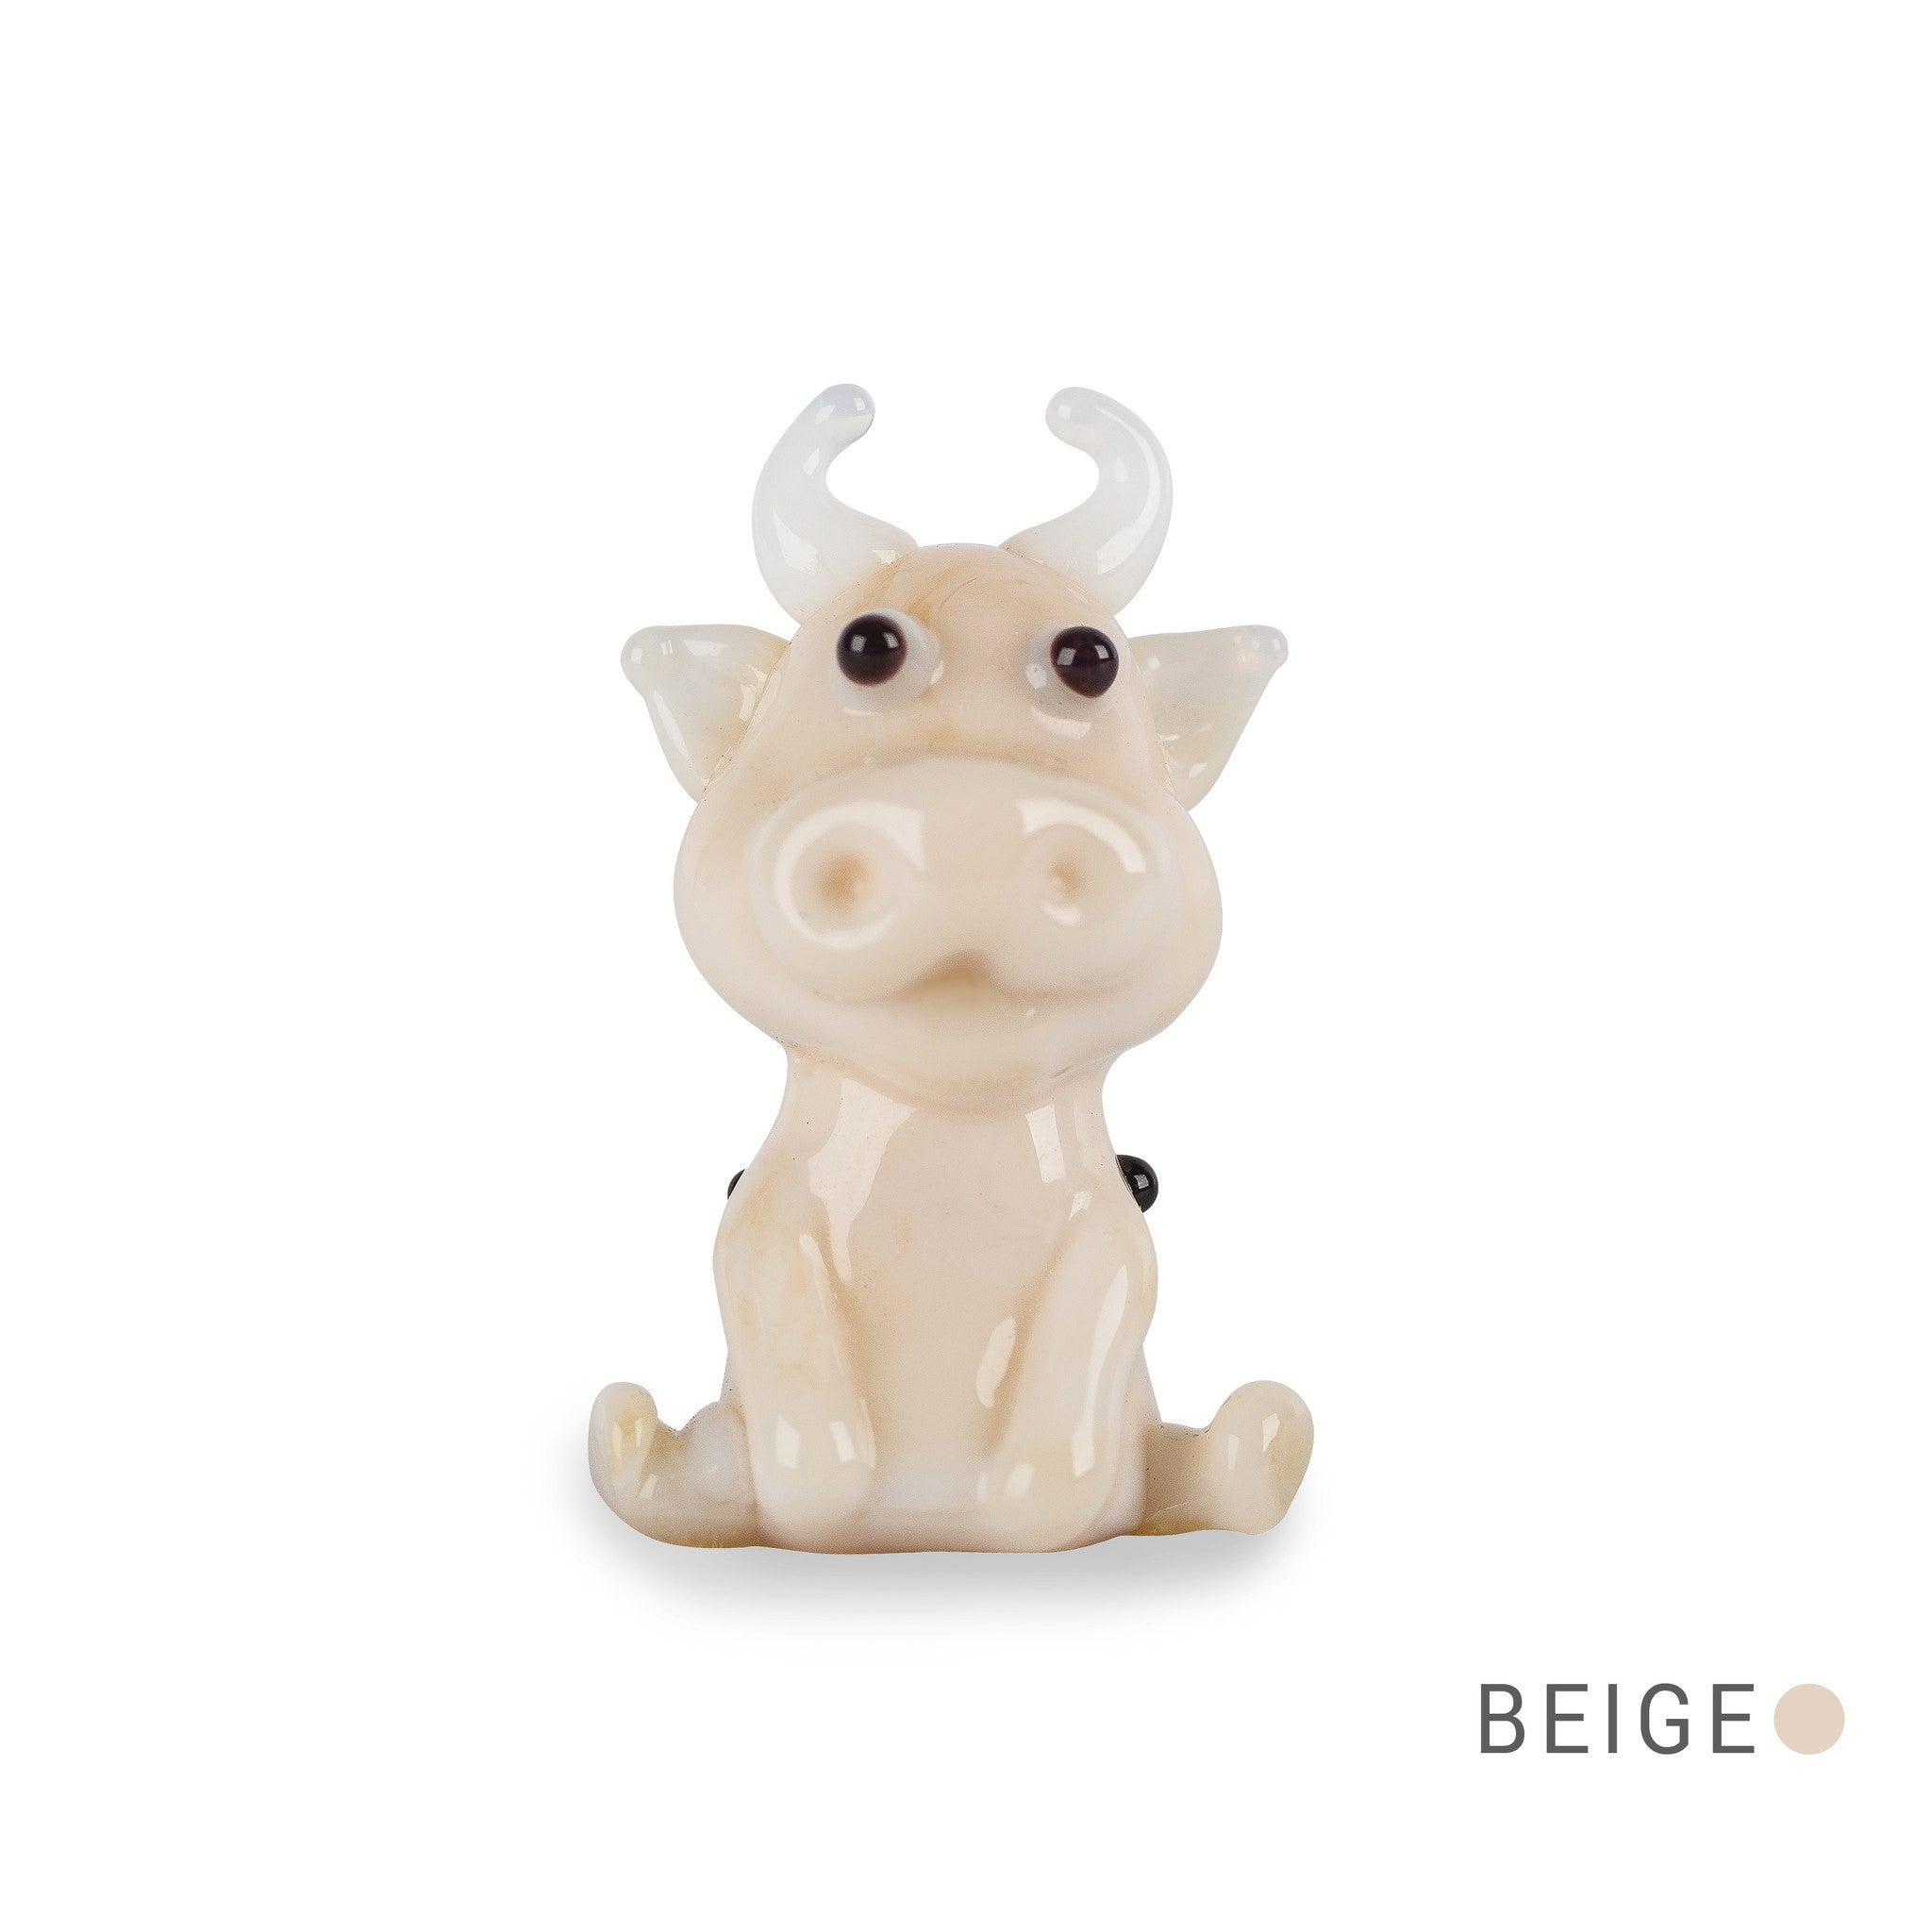 TIKO the cow (in Tynies Collector's Frame) Miniature glass figurines 